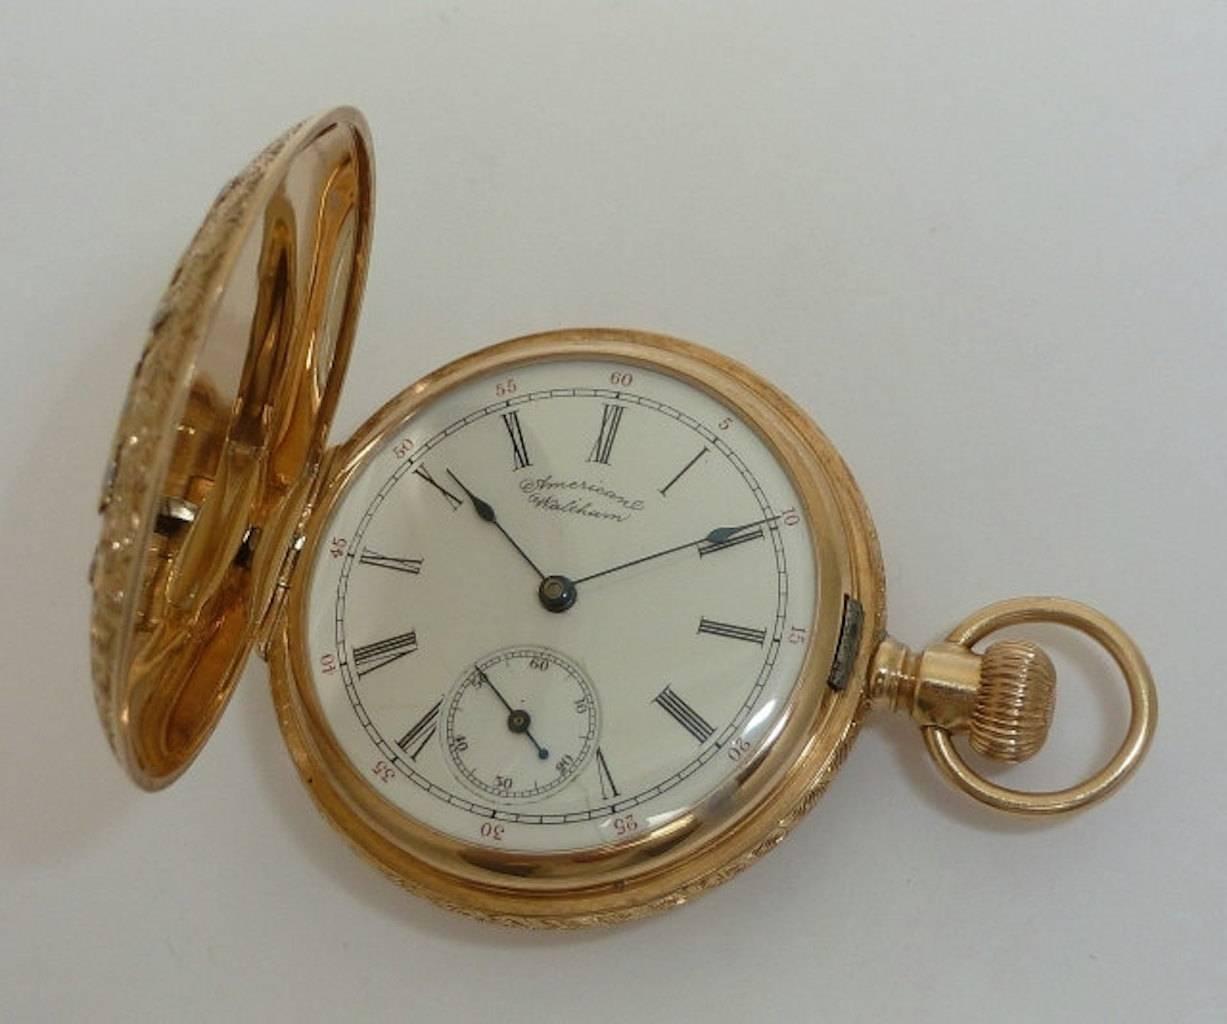 Beacon Hill Jewelers Presents:

A fantastic antique victorian period multi color 14 karat solid gold ladies Waltham pocket watch. Featuring a beautiful hand engraved bird, this multi color pocket watch is engraved throughout and adorned with